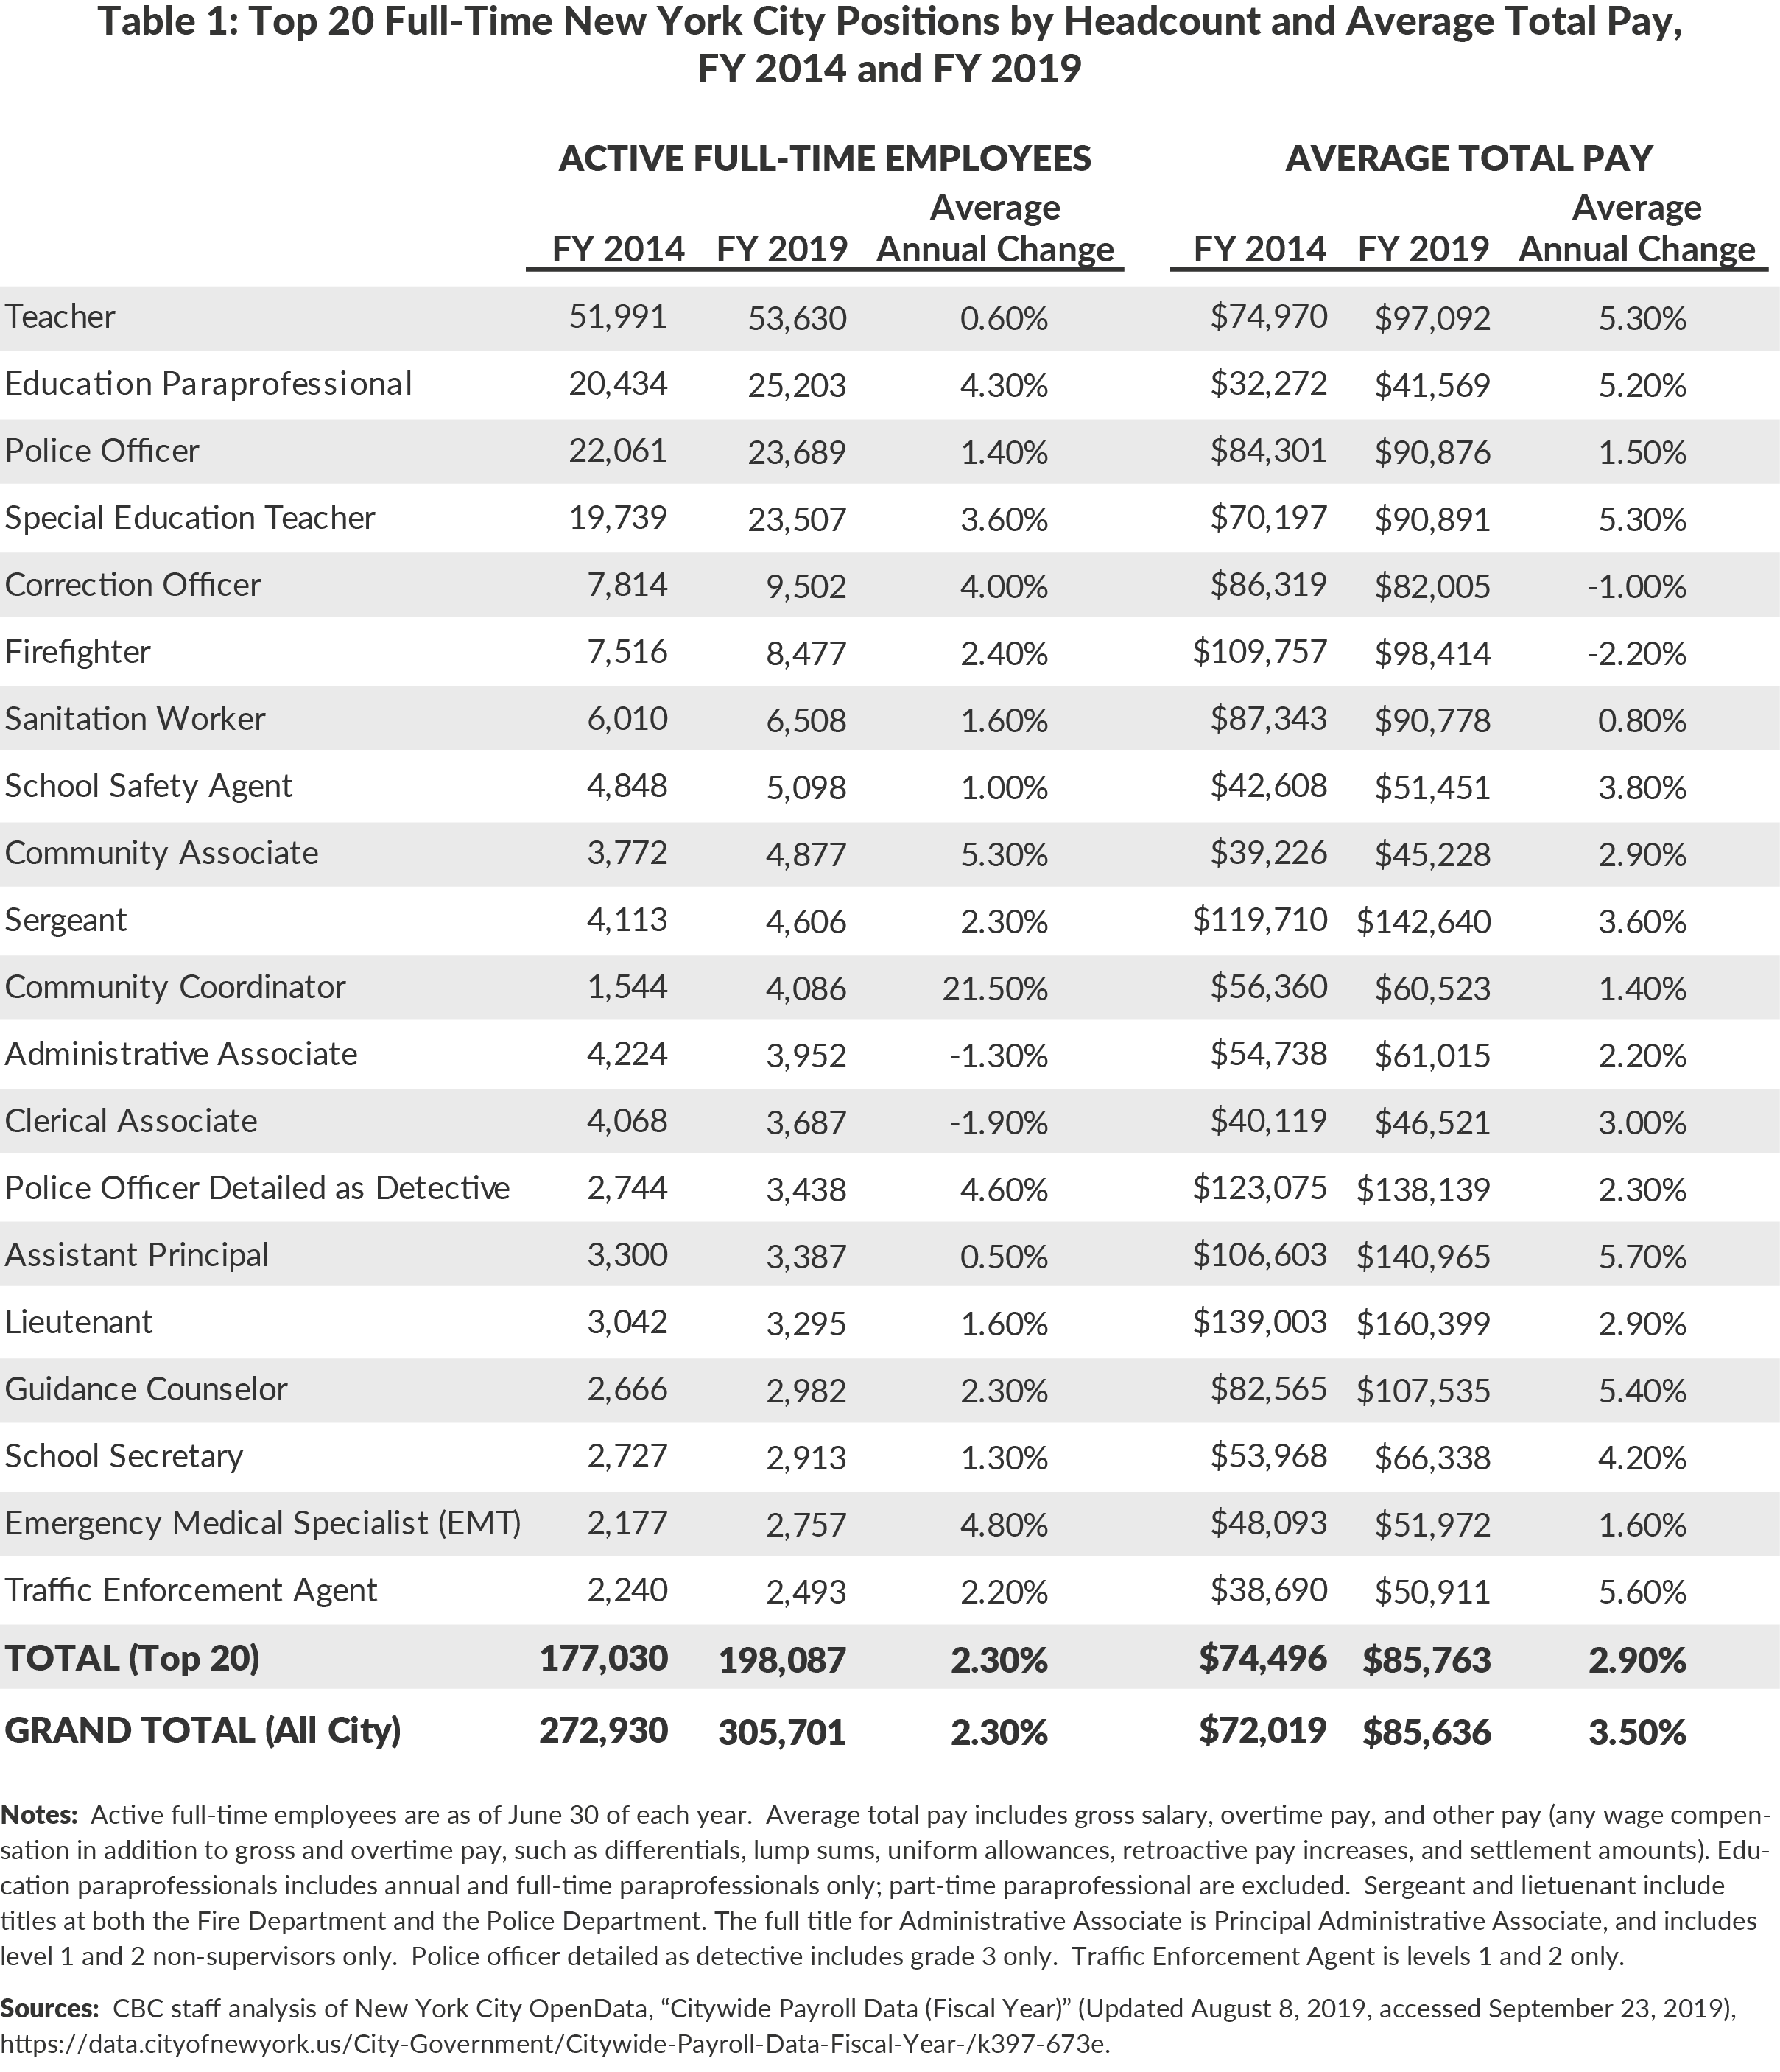 Table 1: Top 20 Full-Time New York City Positions by Headcount and Average Total Pay, FY 2014 and FY 2019